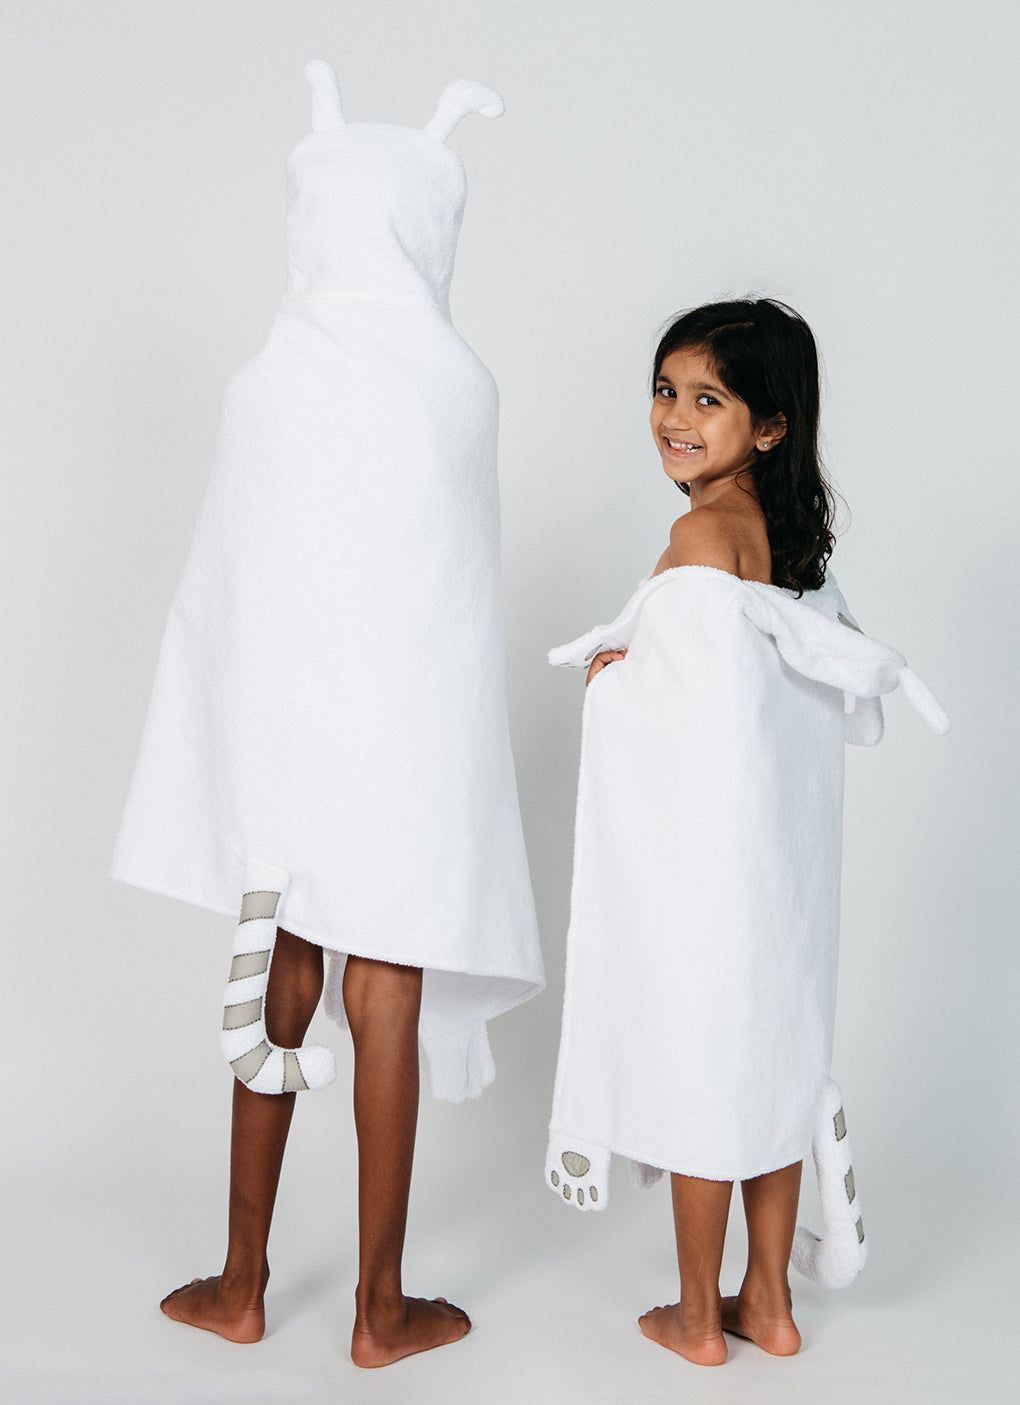 Hooded Towel Panda Bath Towels for Children and Adults – Knotty Kid